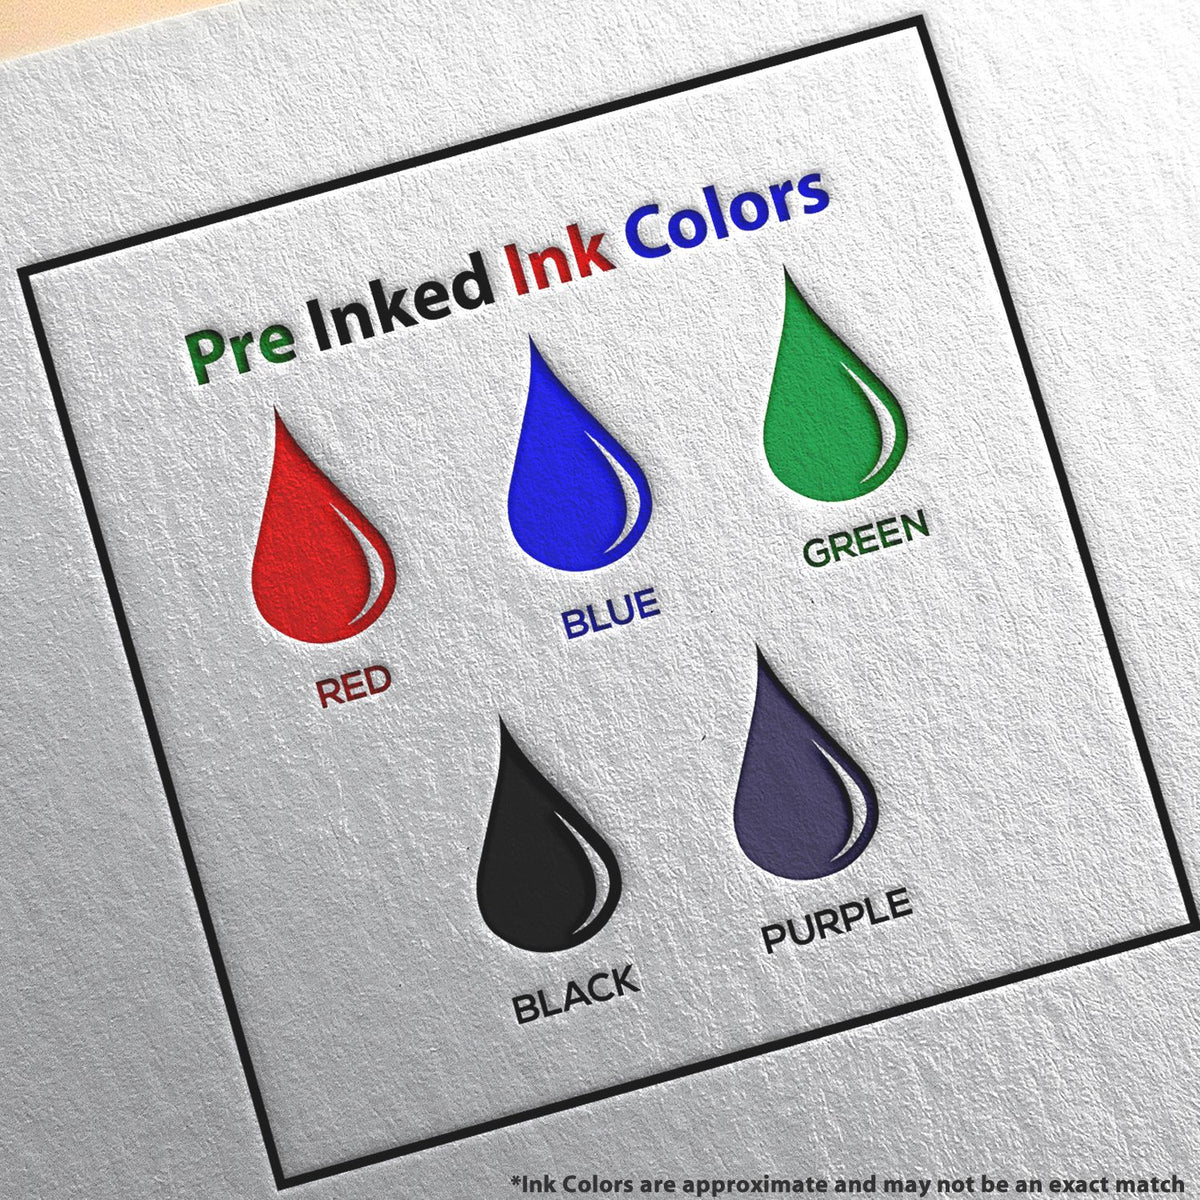 A picture showing the different ink colors or hues available for the Slim Pre-Inked Hawaii Landscape Architect Seal Stamp product.